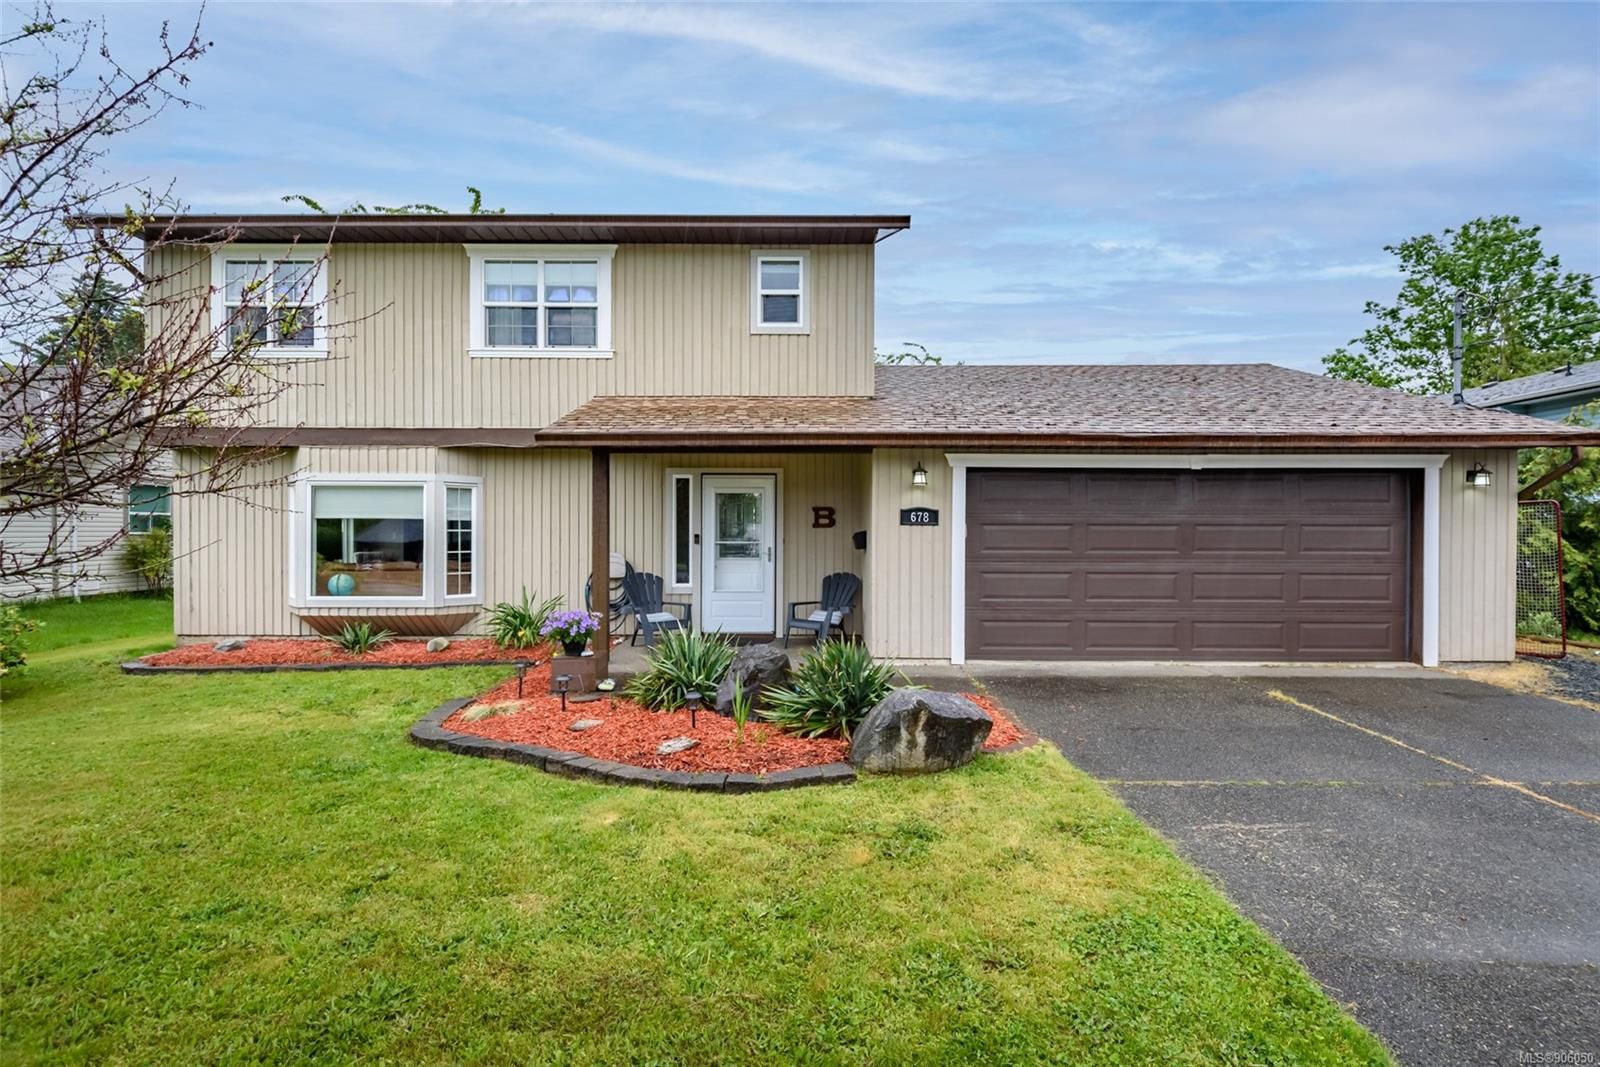 Open House. Open House on Saturday, June 11, 2022 12:00PM - 1:00PM